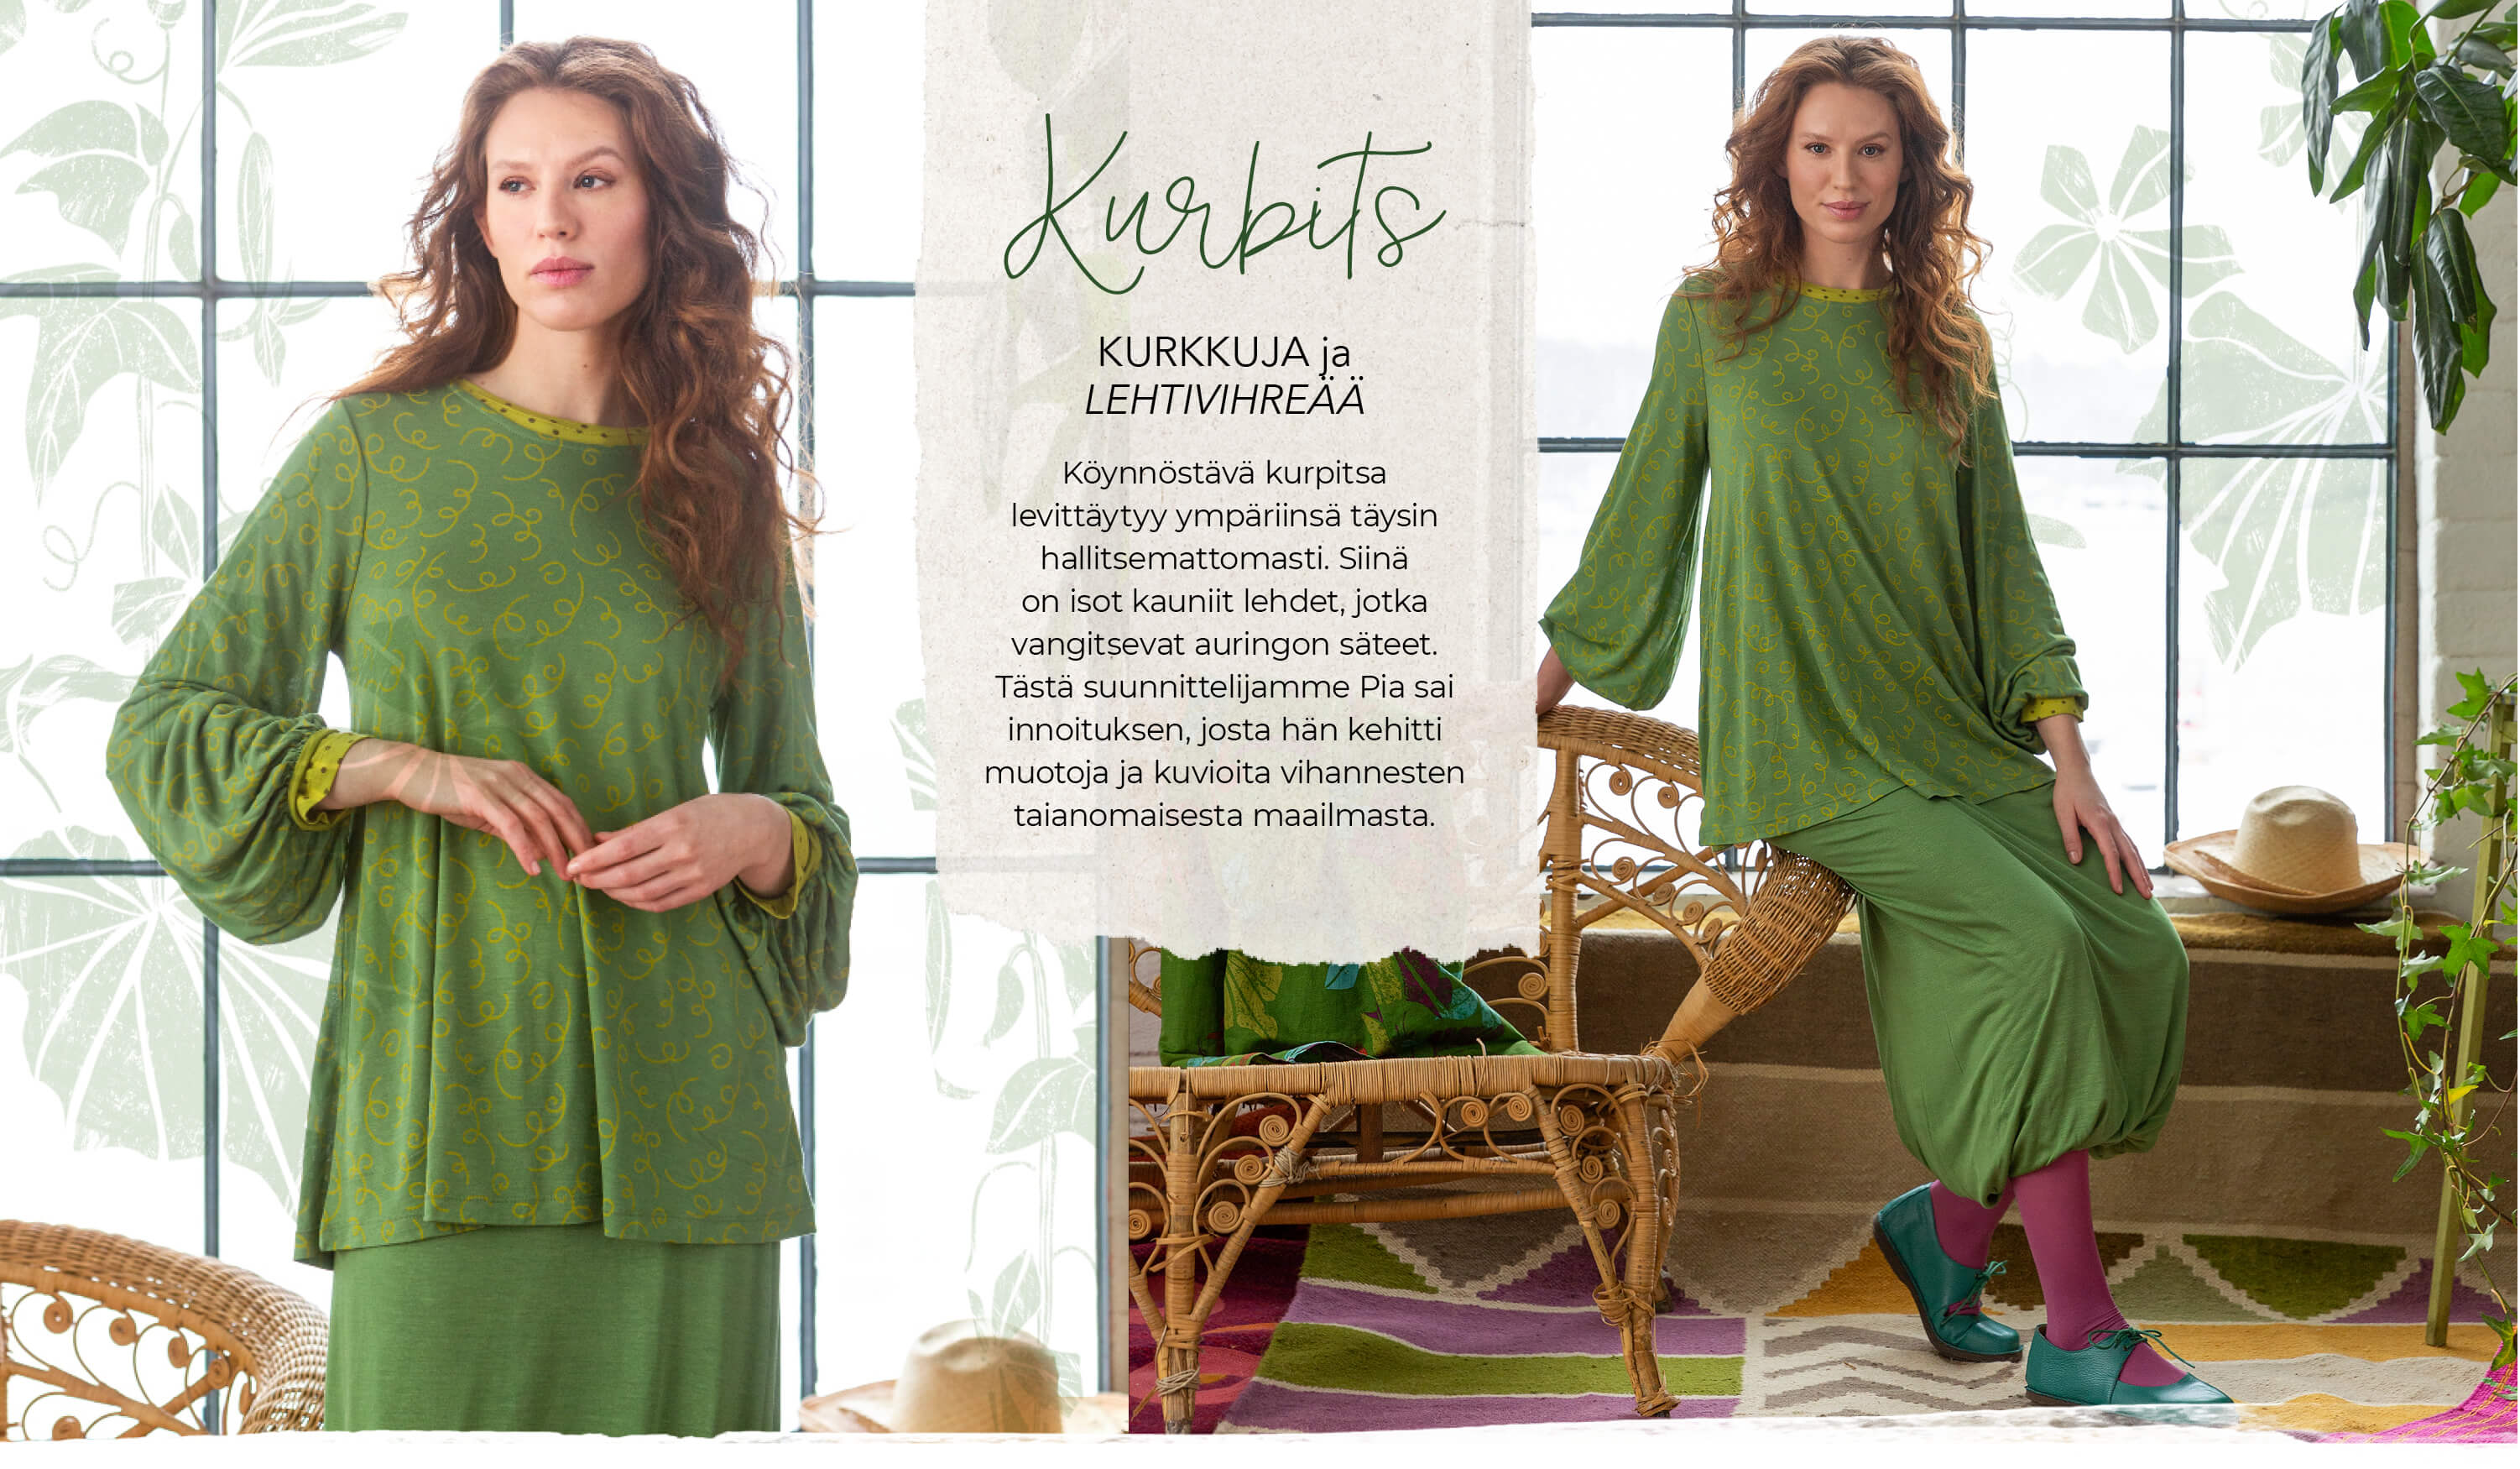 “Kurbits” – floral motifs. With cucumber vines and lush greens